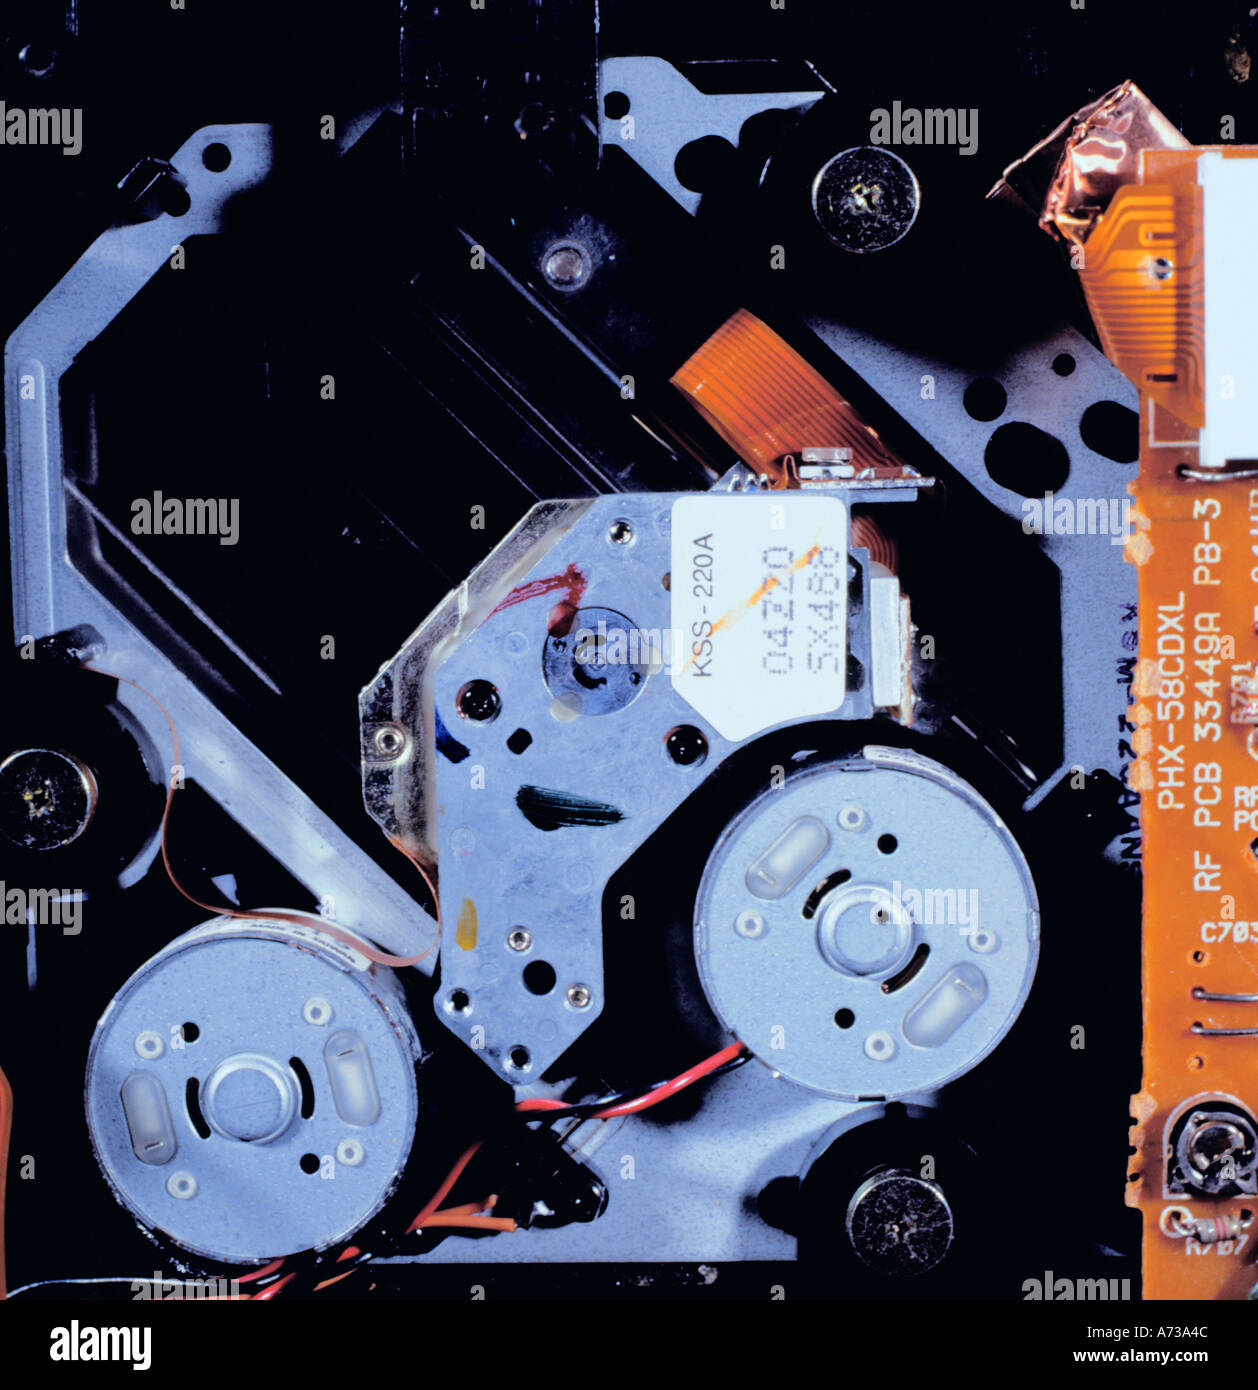 Inside a CD (compact disc) player laser control mechanism, seen from below  Stock Photo - Alamy